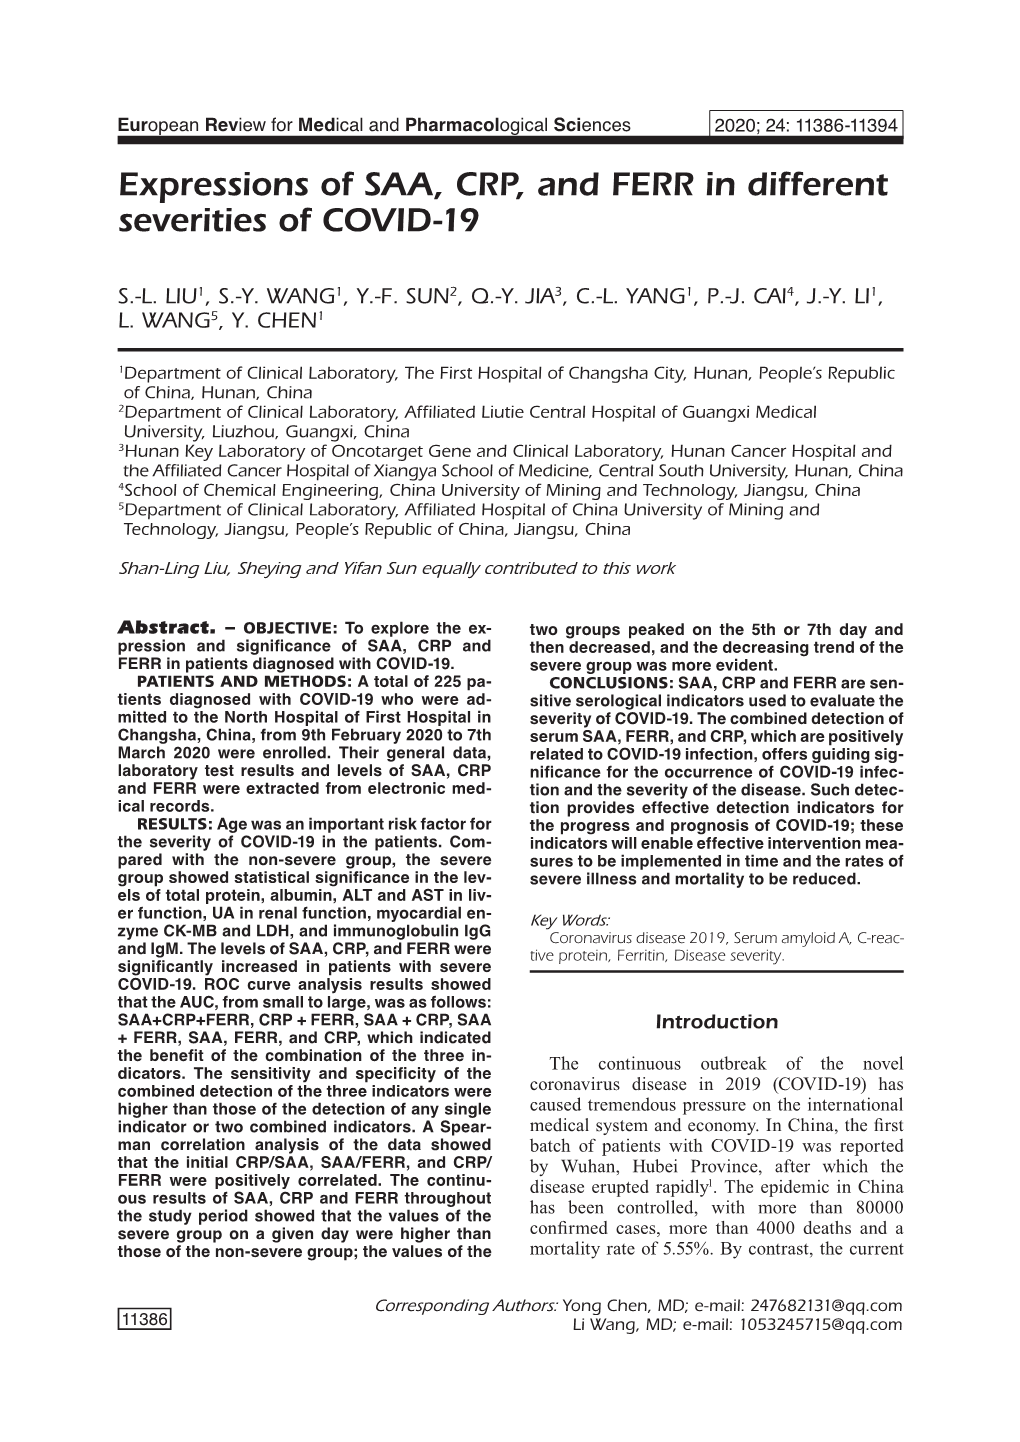 Expressions of SAA, CRP, and FERR in Different Severities of COVID-19